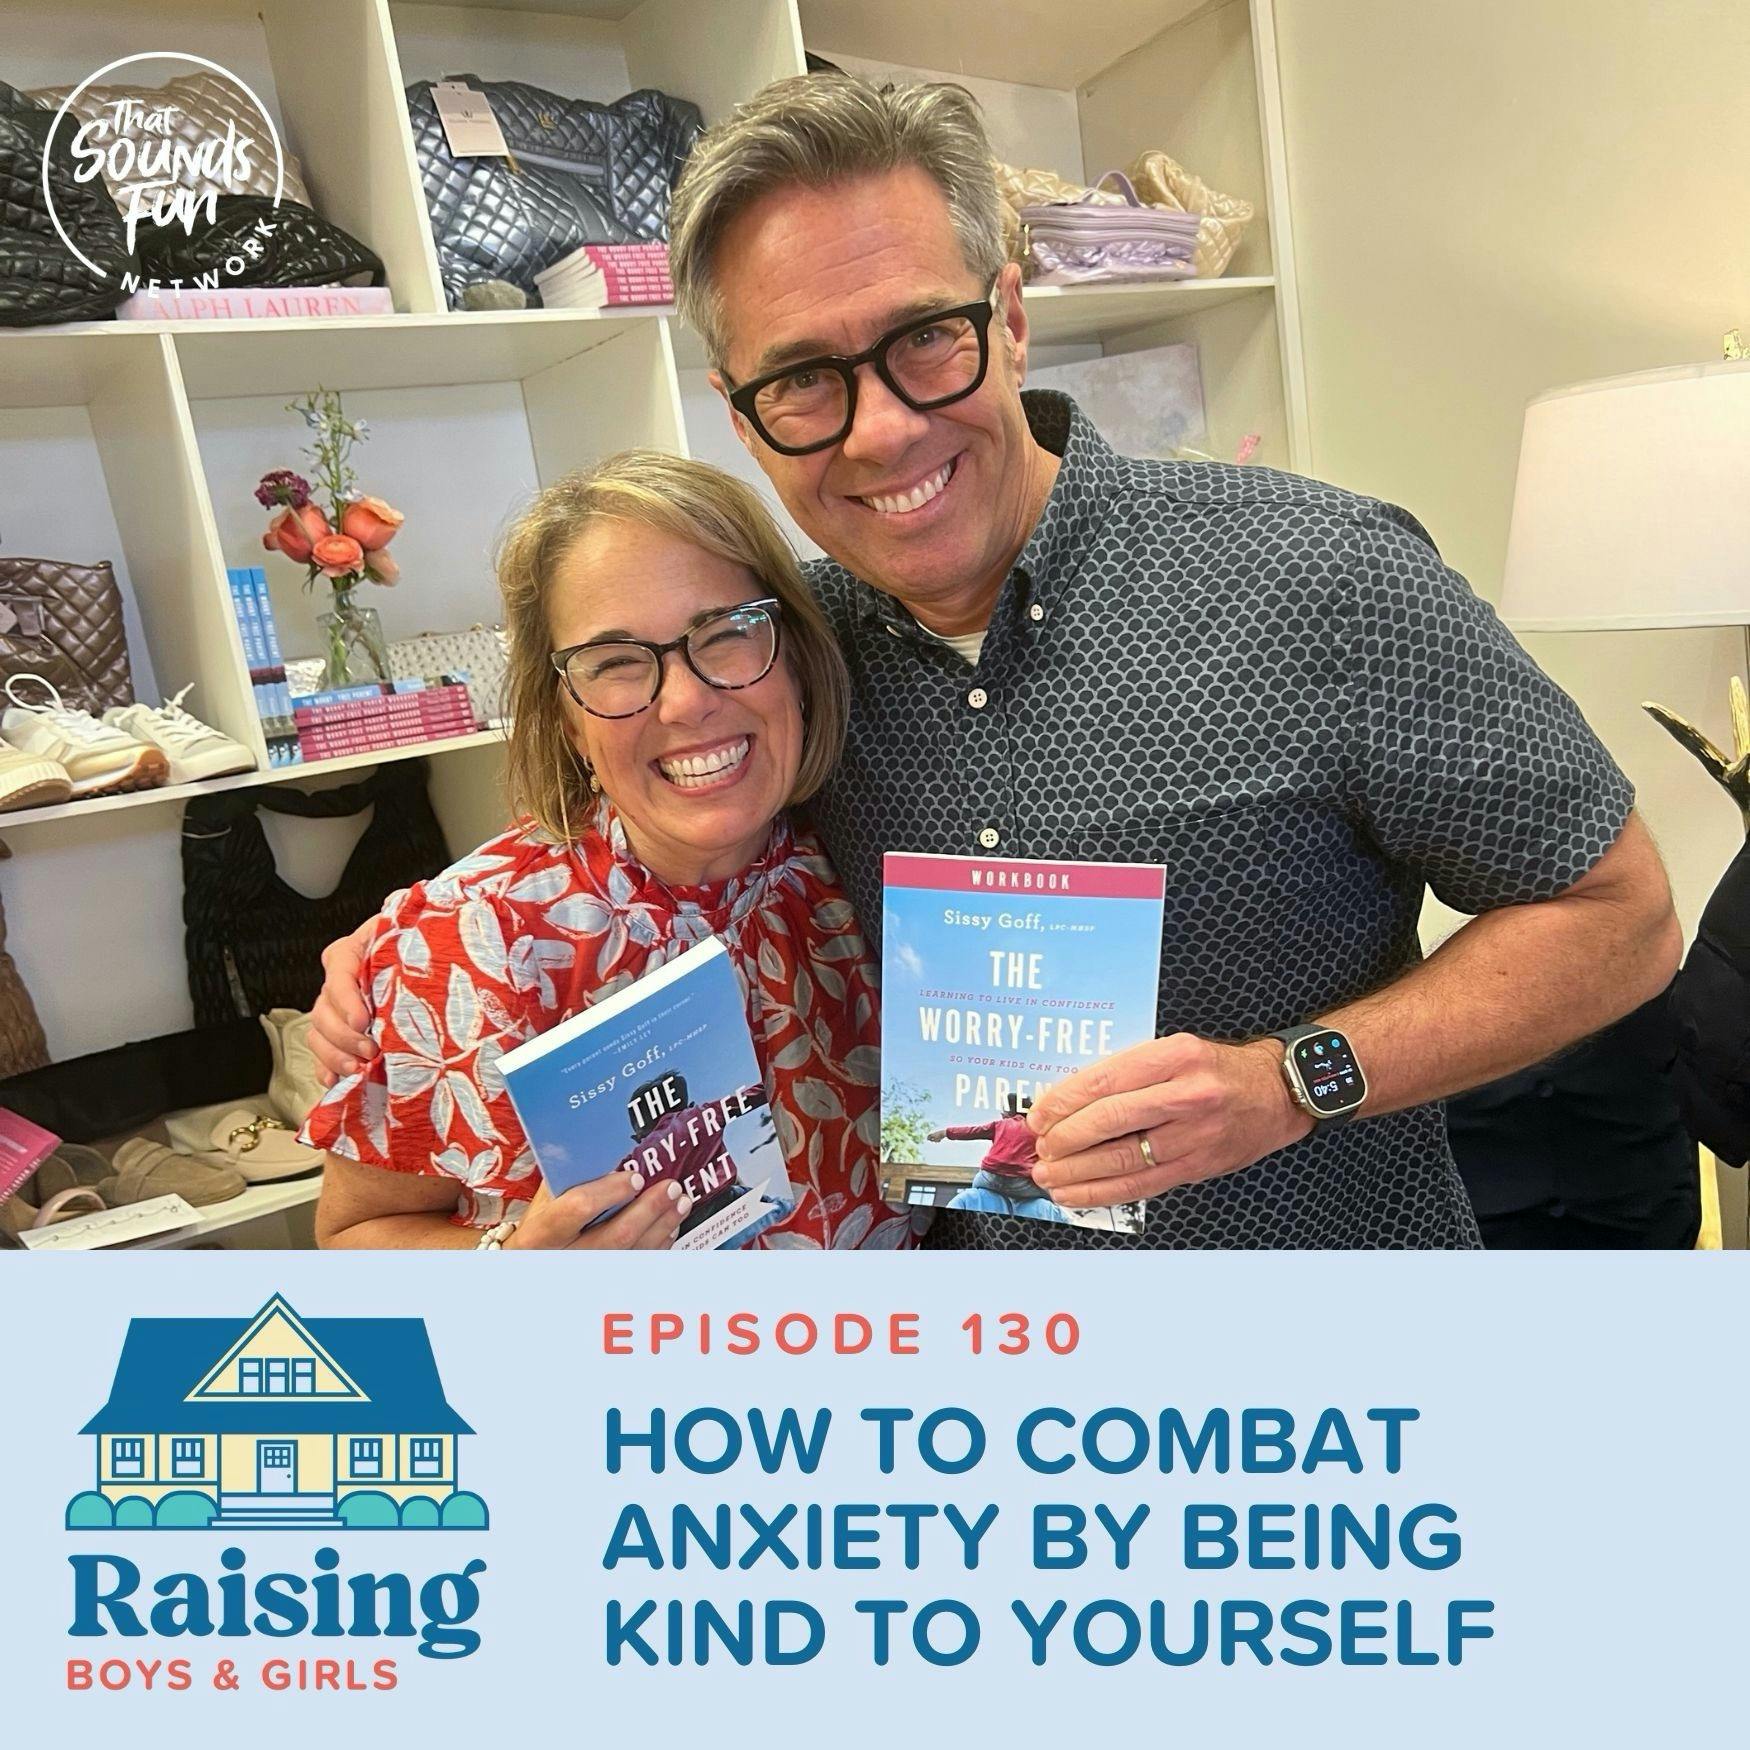 Episode 130: How to Combat Anxiety by Being Kind to Yourself